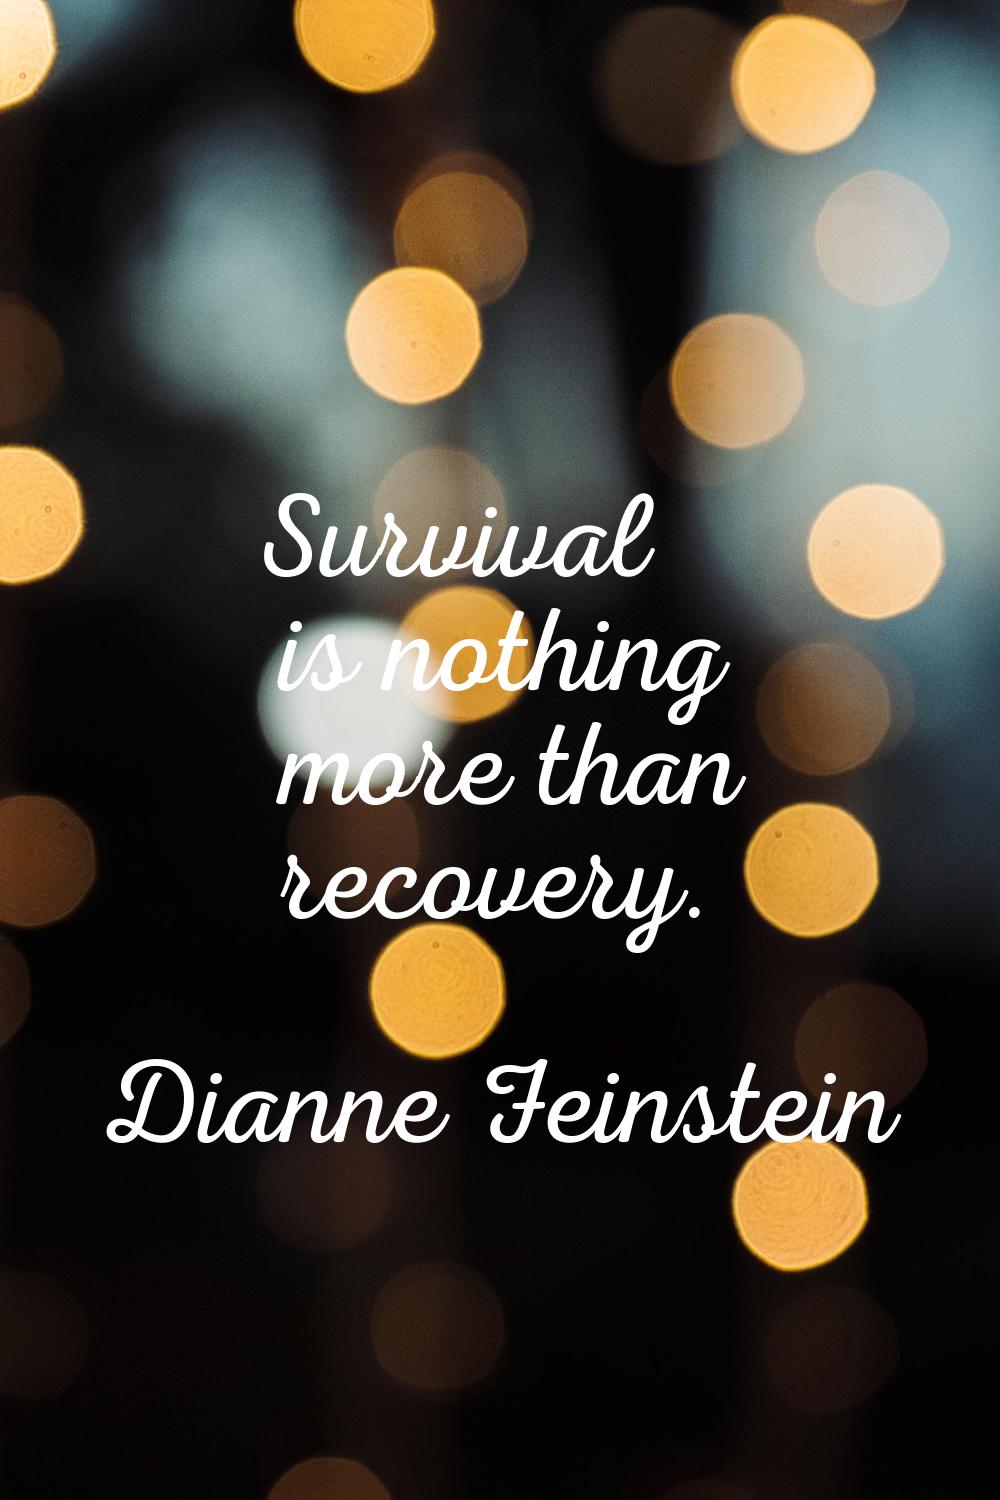 Survival is nothing more than recovery.